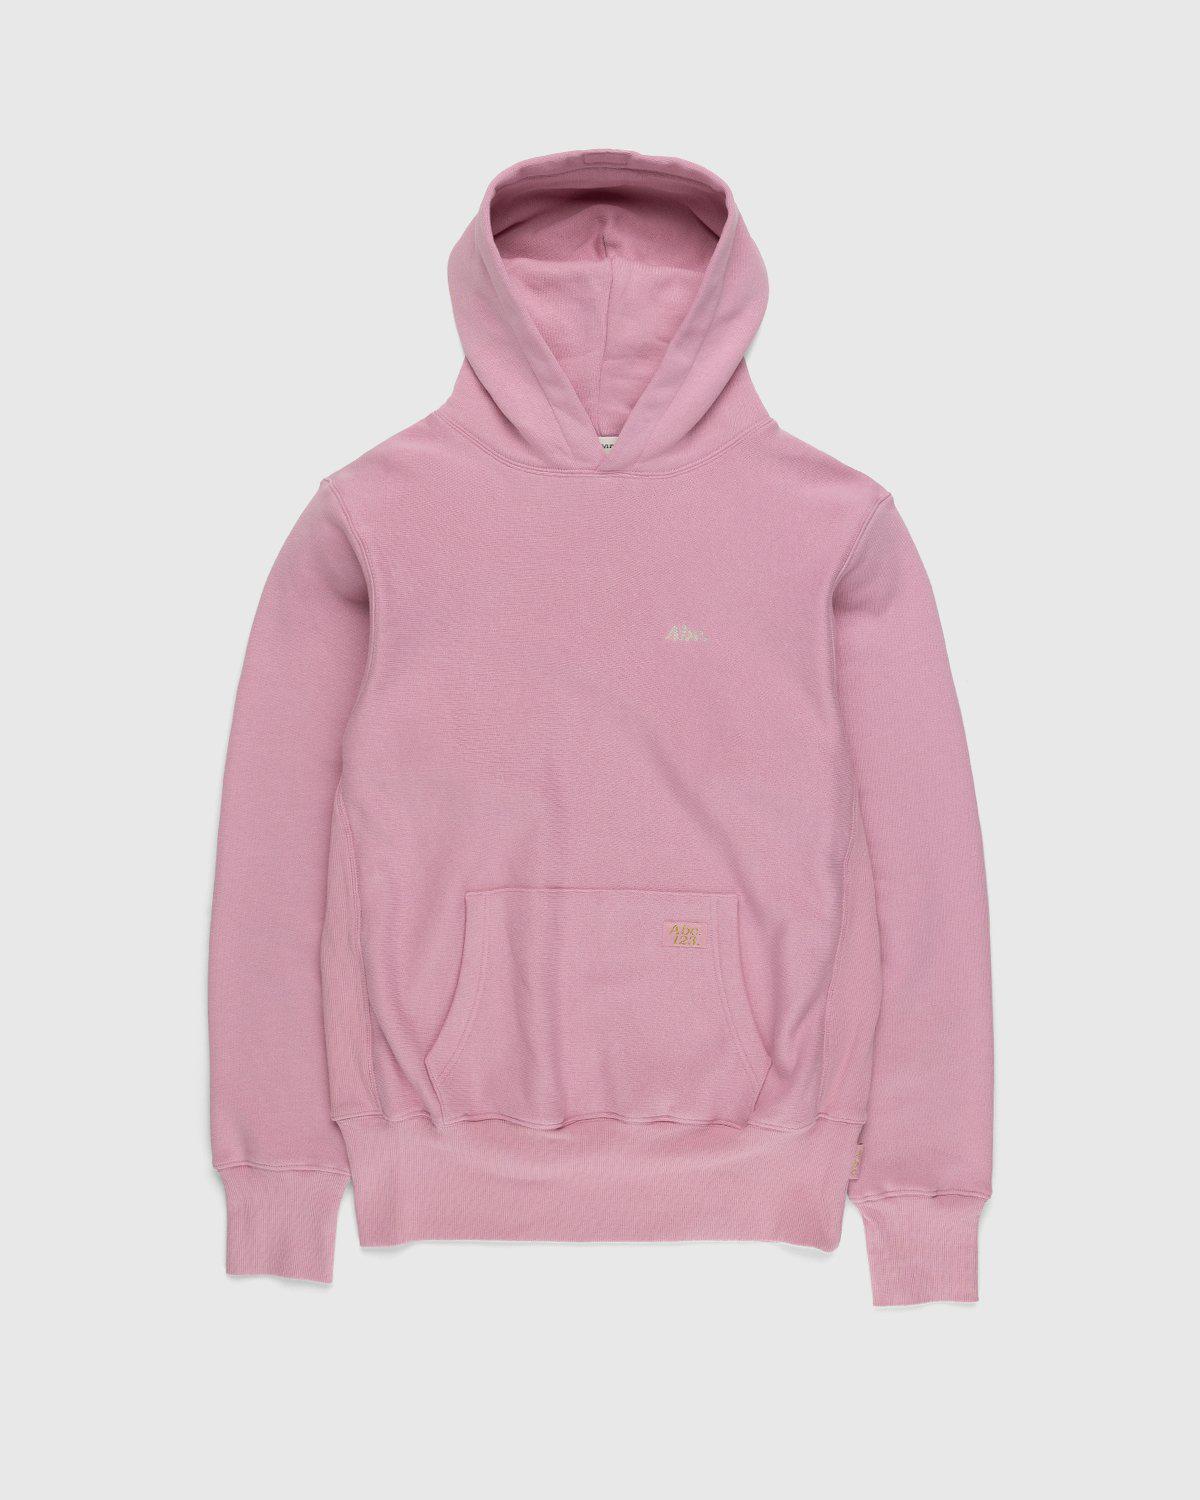 Abc. – Pullover Hoodie Morganite by ABC.